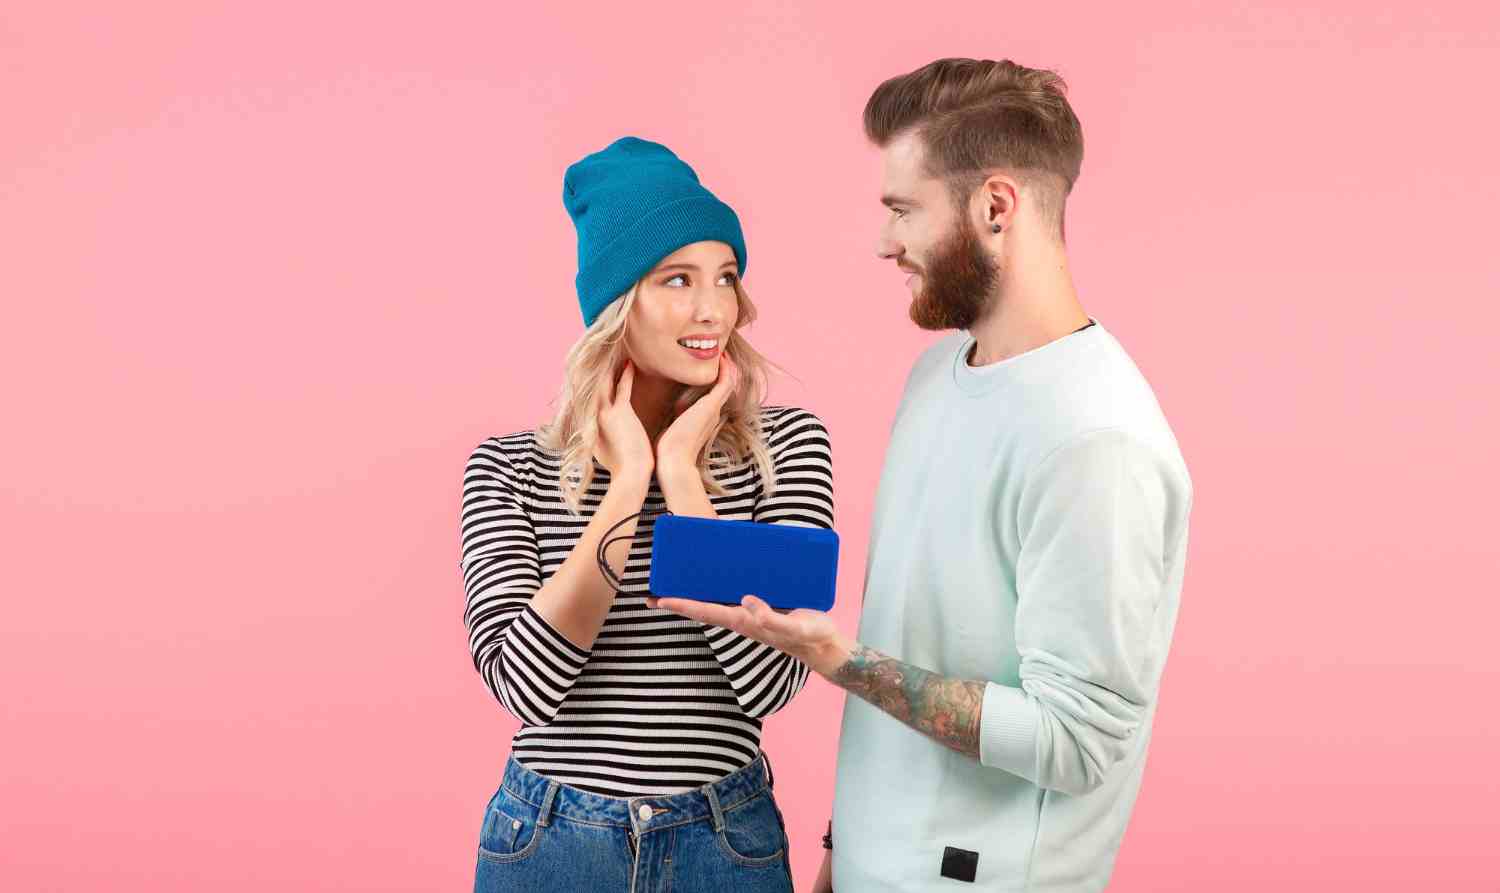 young couple listening music wireless speaker wearing cool stylish outfit smiling posing pink